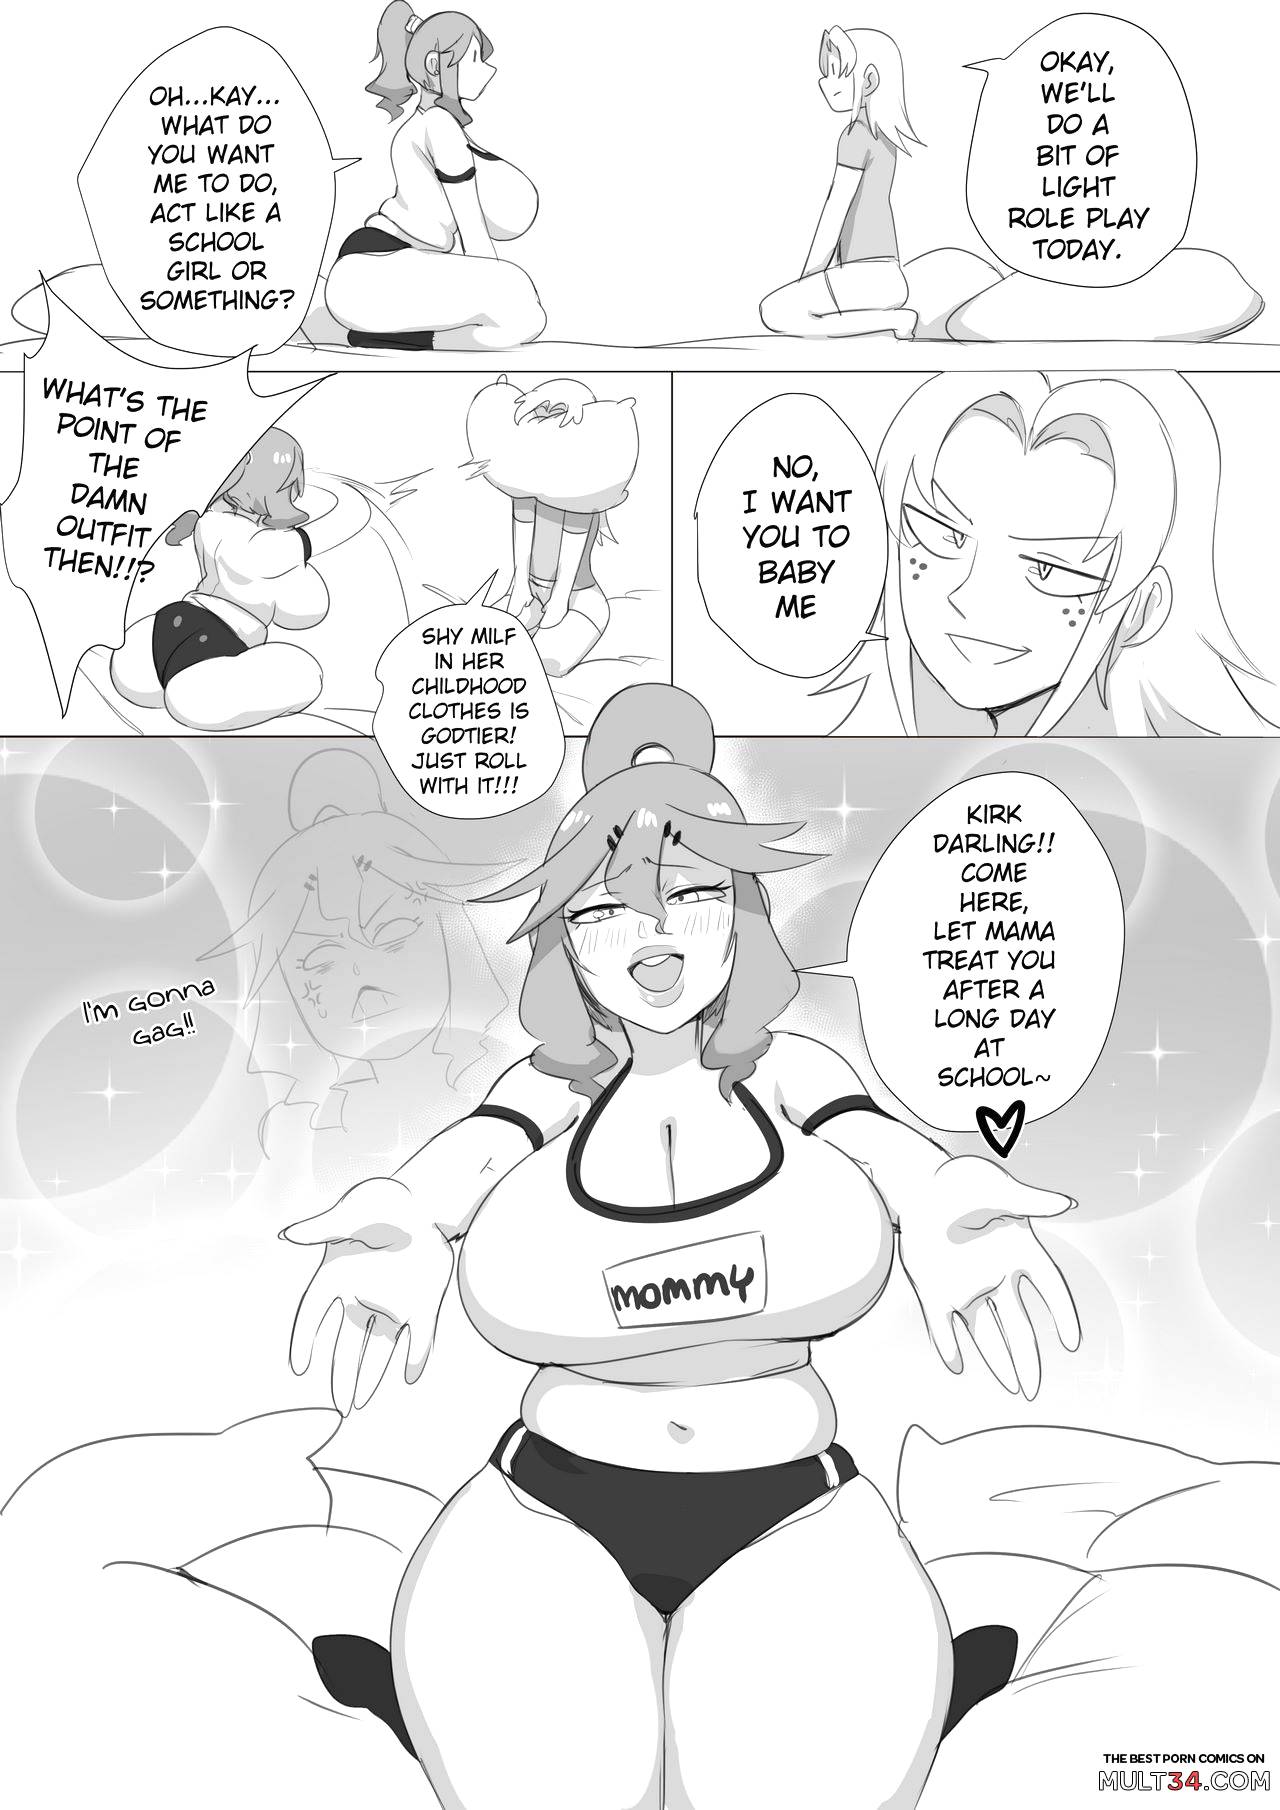 I'm Not A Milf I'm Your Girlfriend You Ass! + Kirk's Training Montage page 6